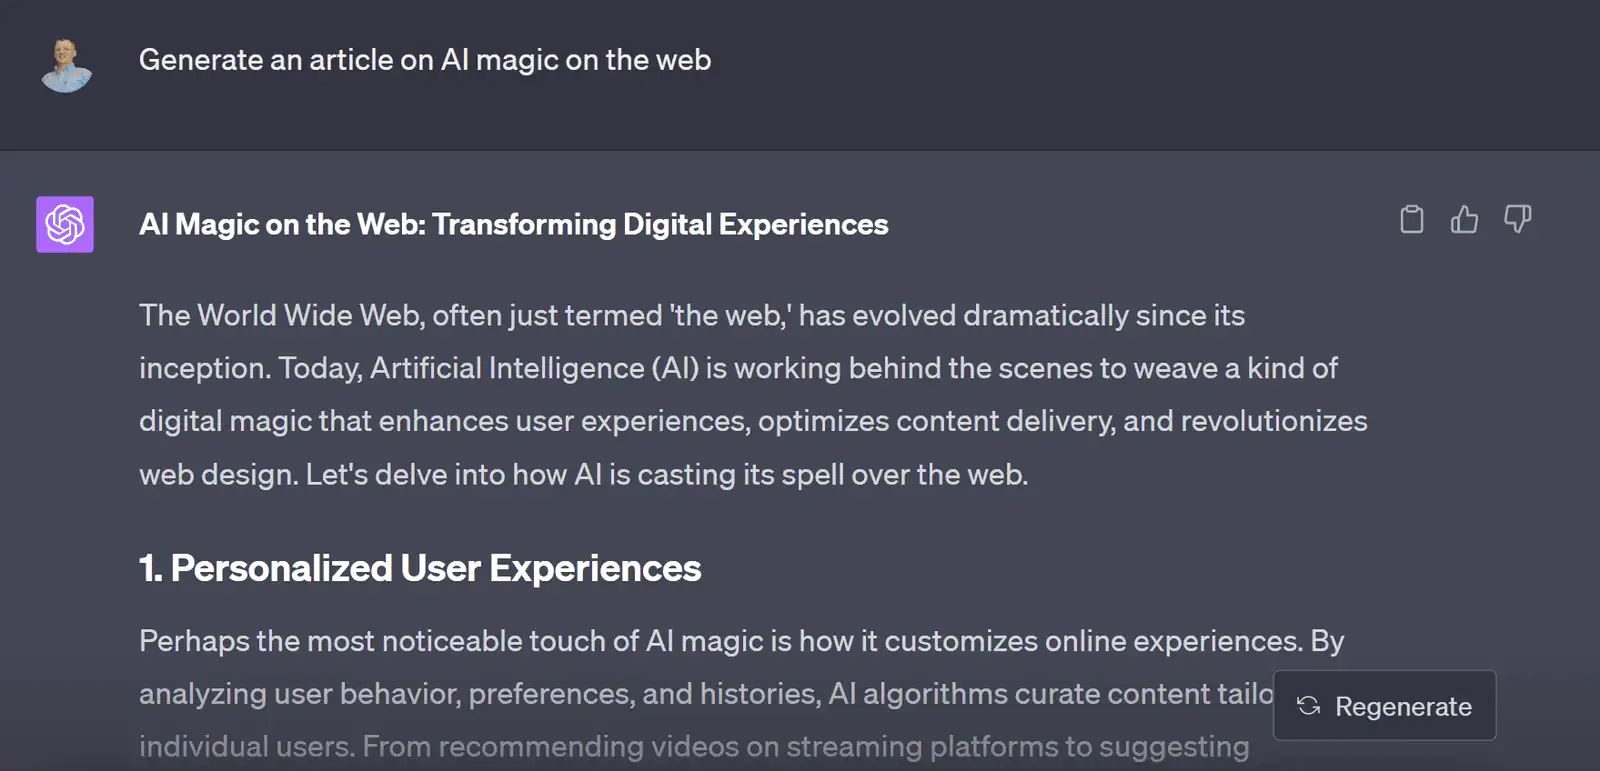 AI magic on the web - an aticle generated by ChatGPT